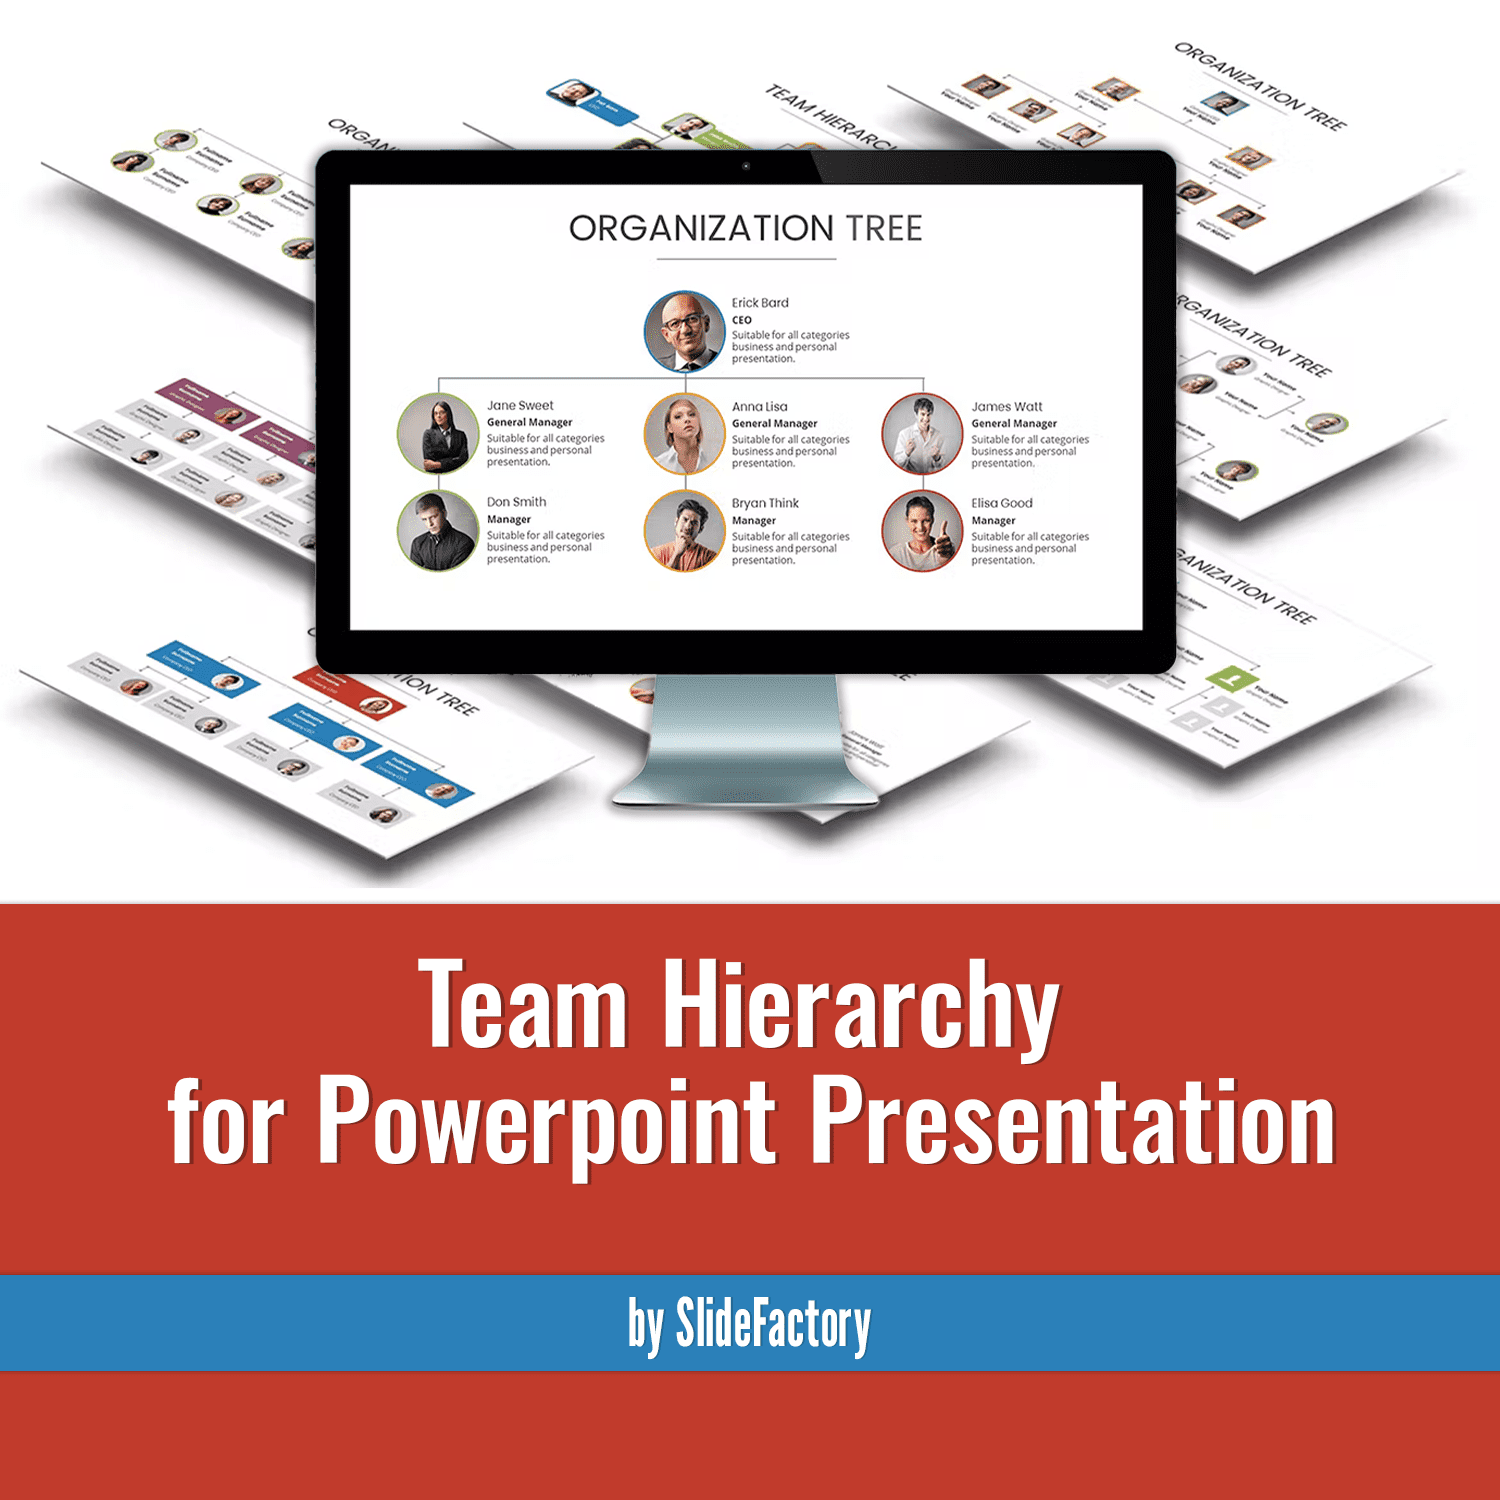 Bundle of images of amazing presentation template slides on the topic of hierarchy in a team.